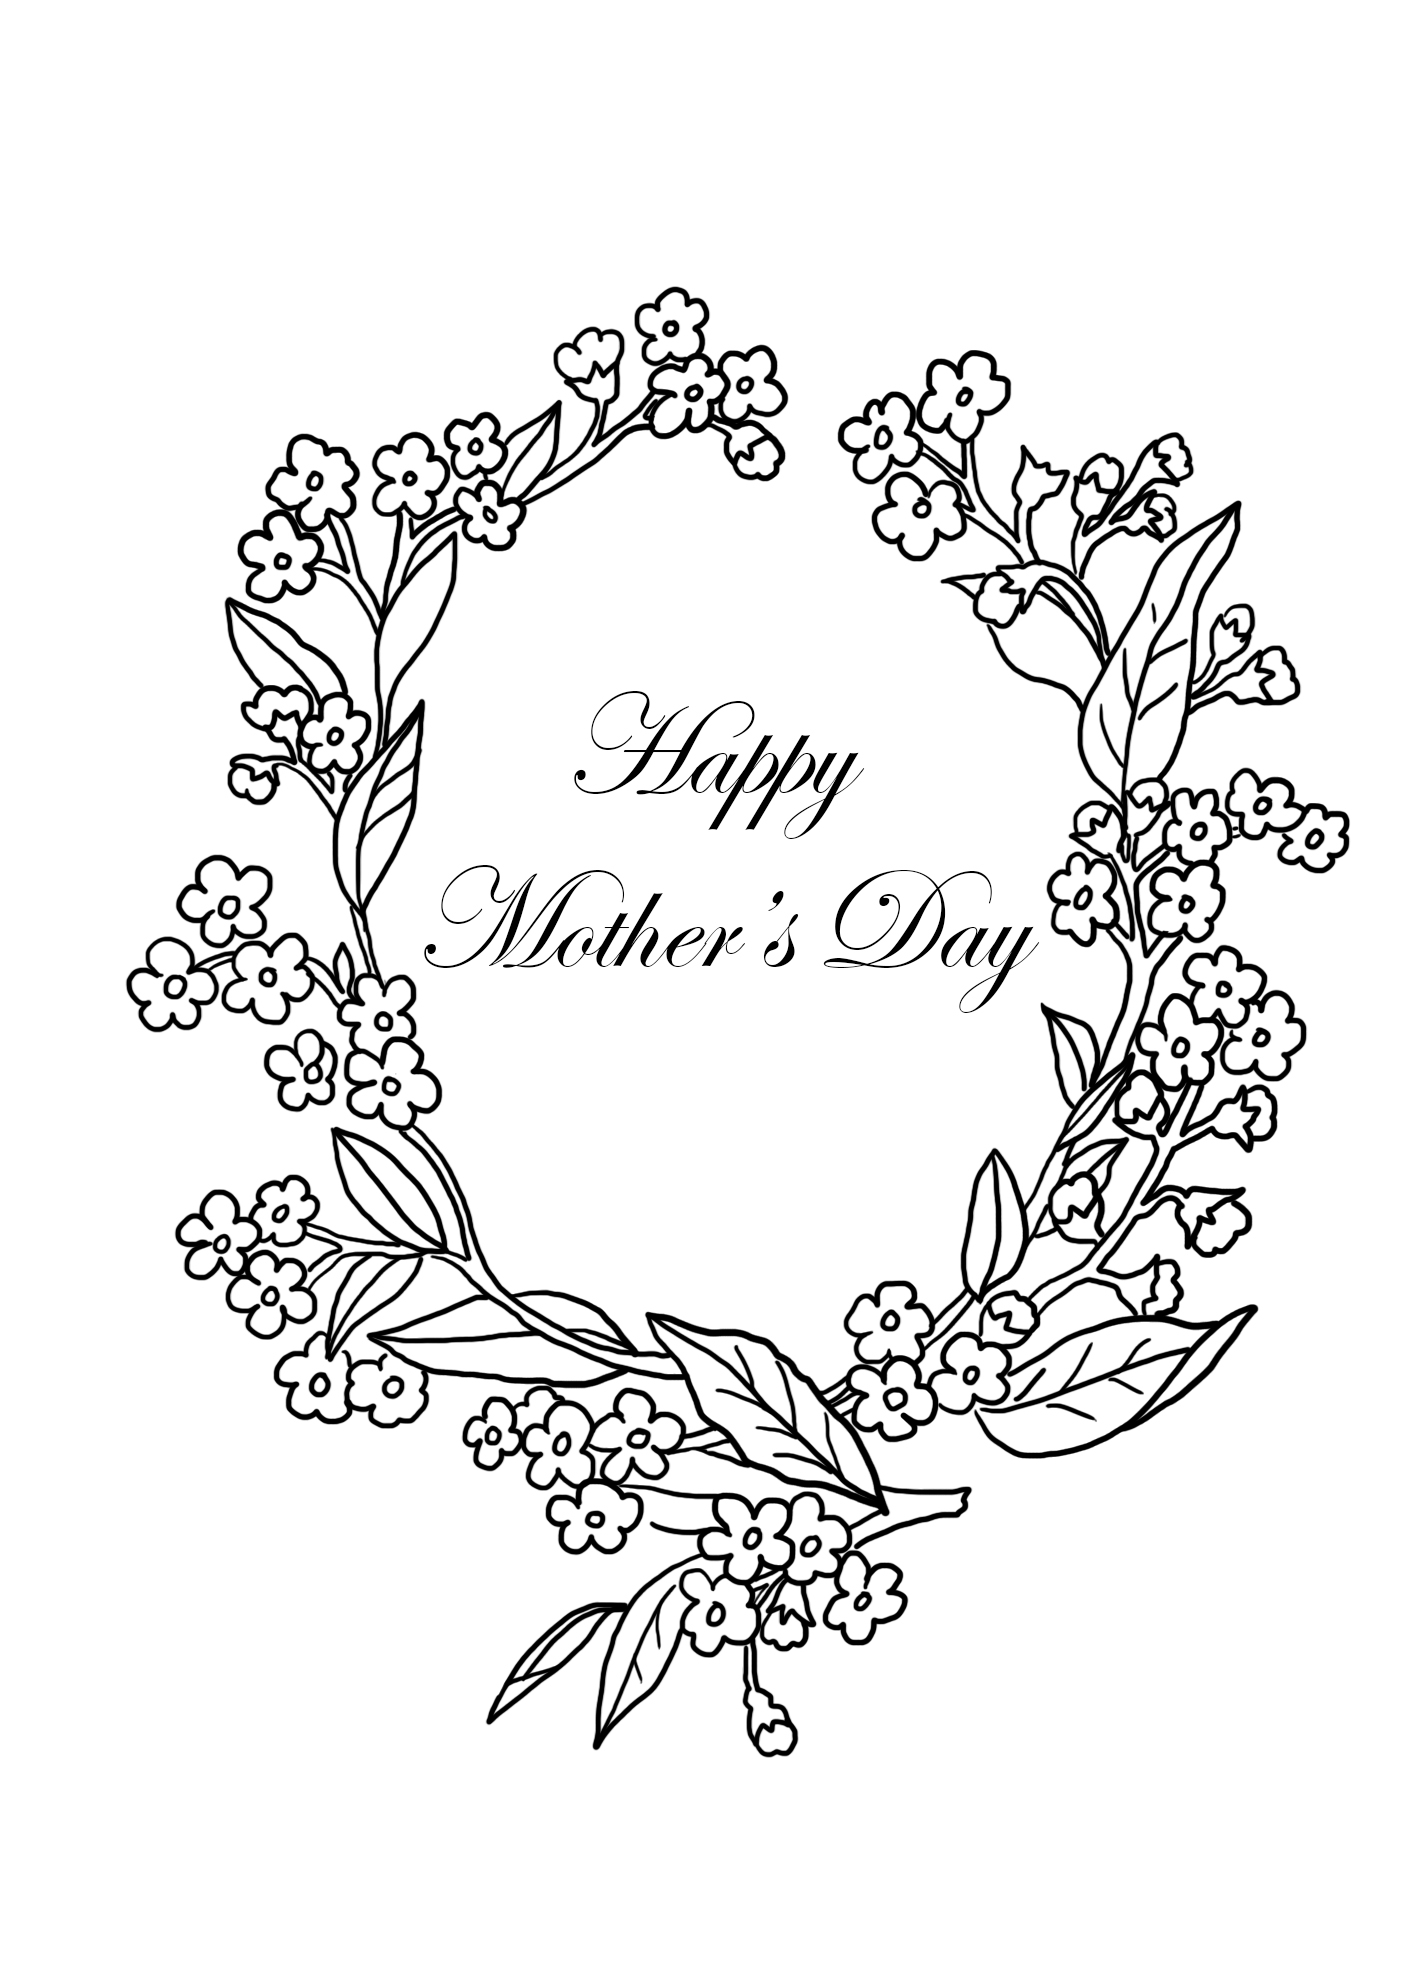 mothers day coloring page with forget-me-not